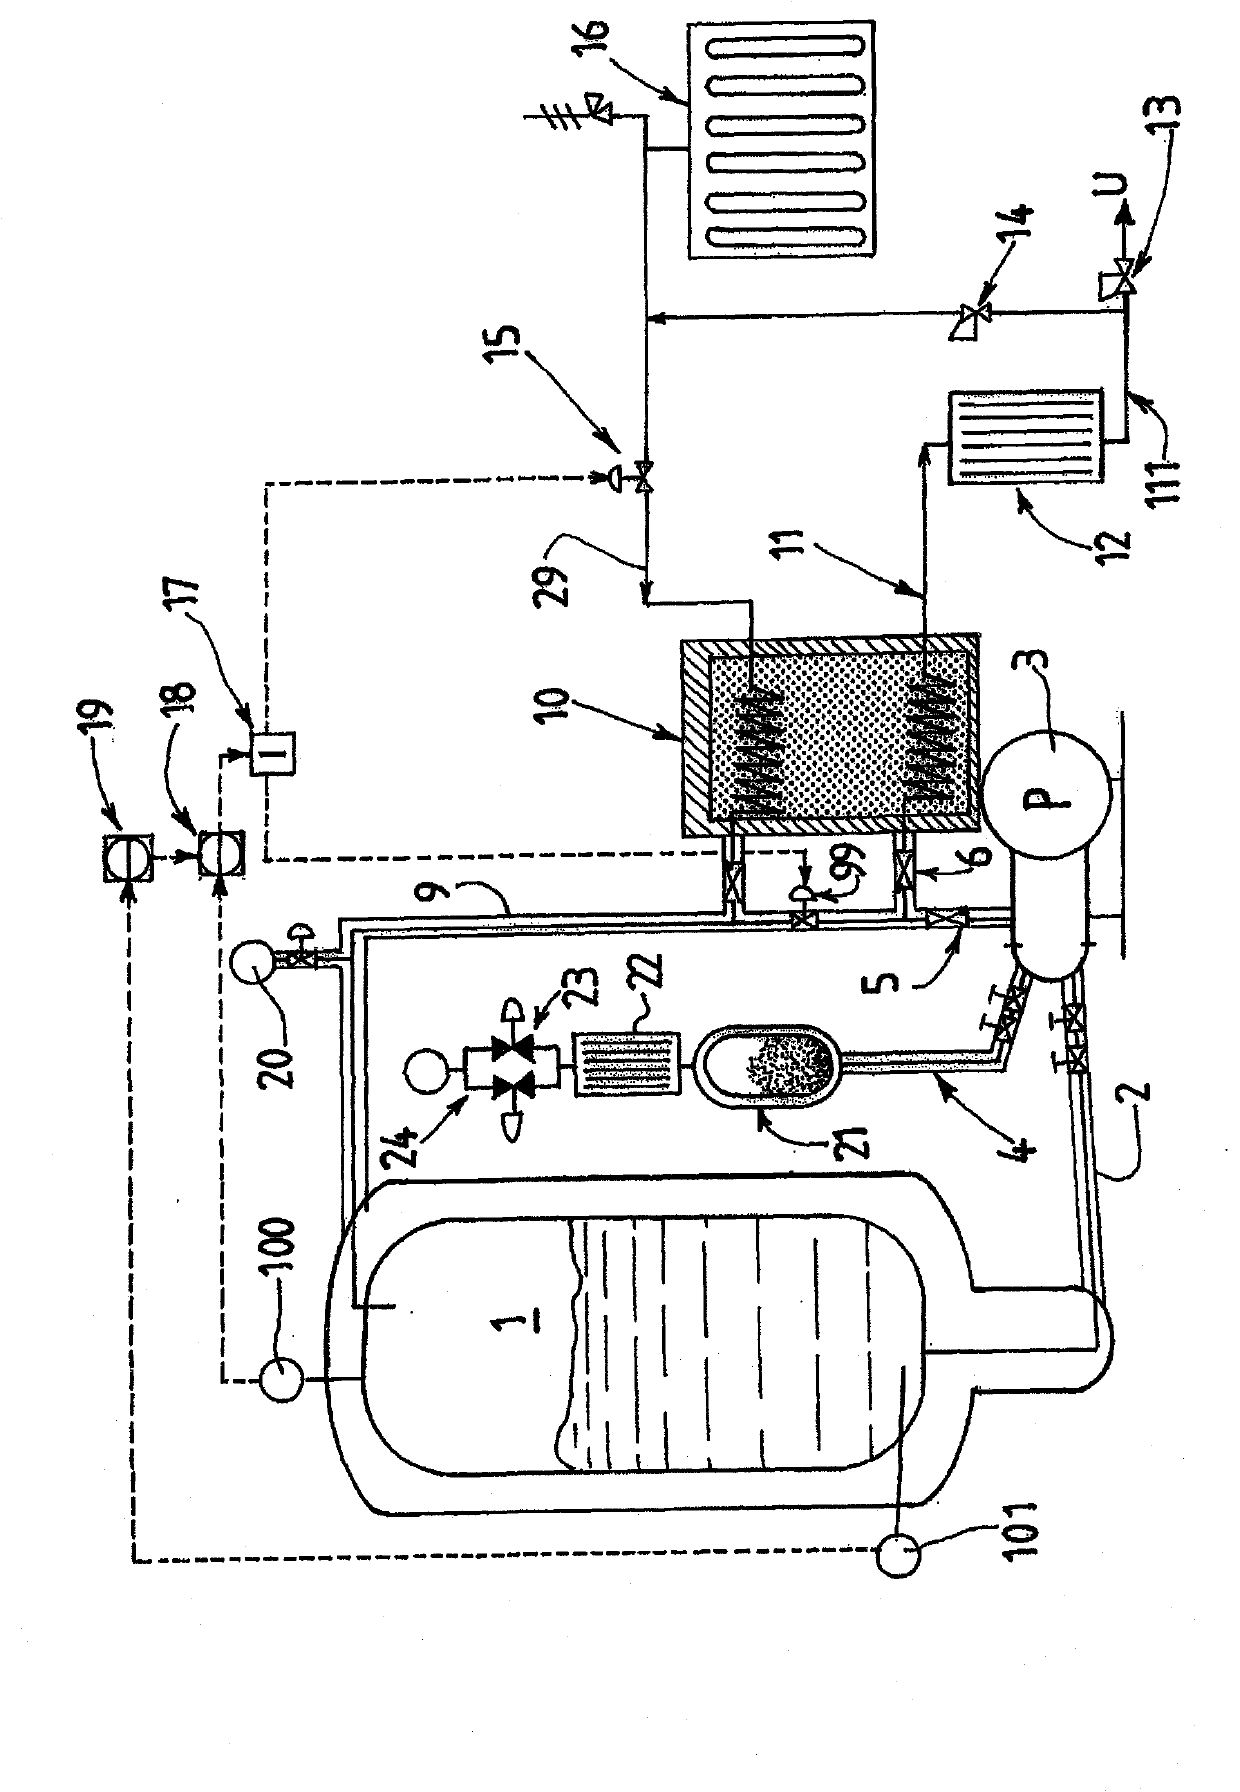 Device and method for pumping a cryogenic fluid